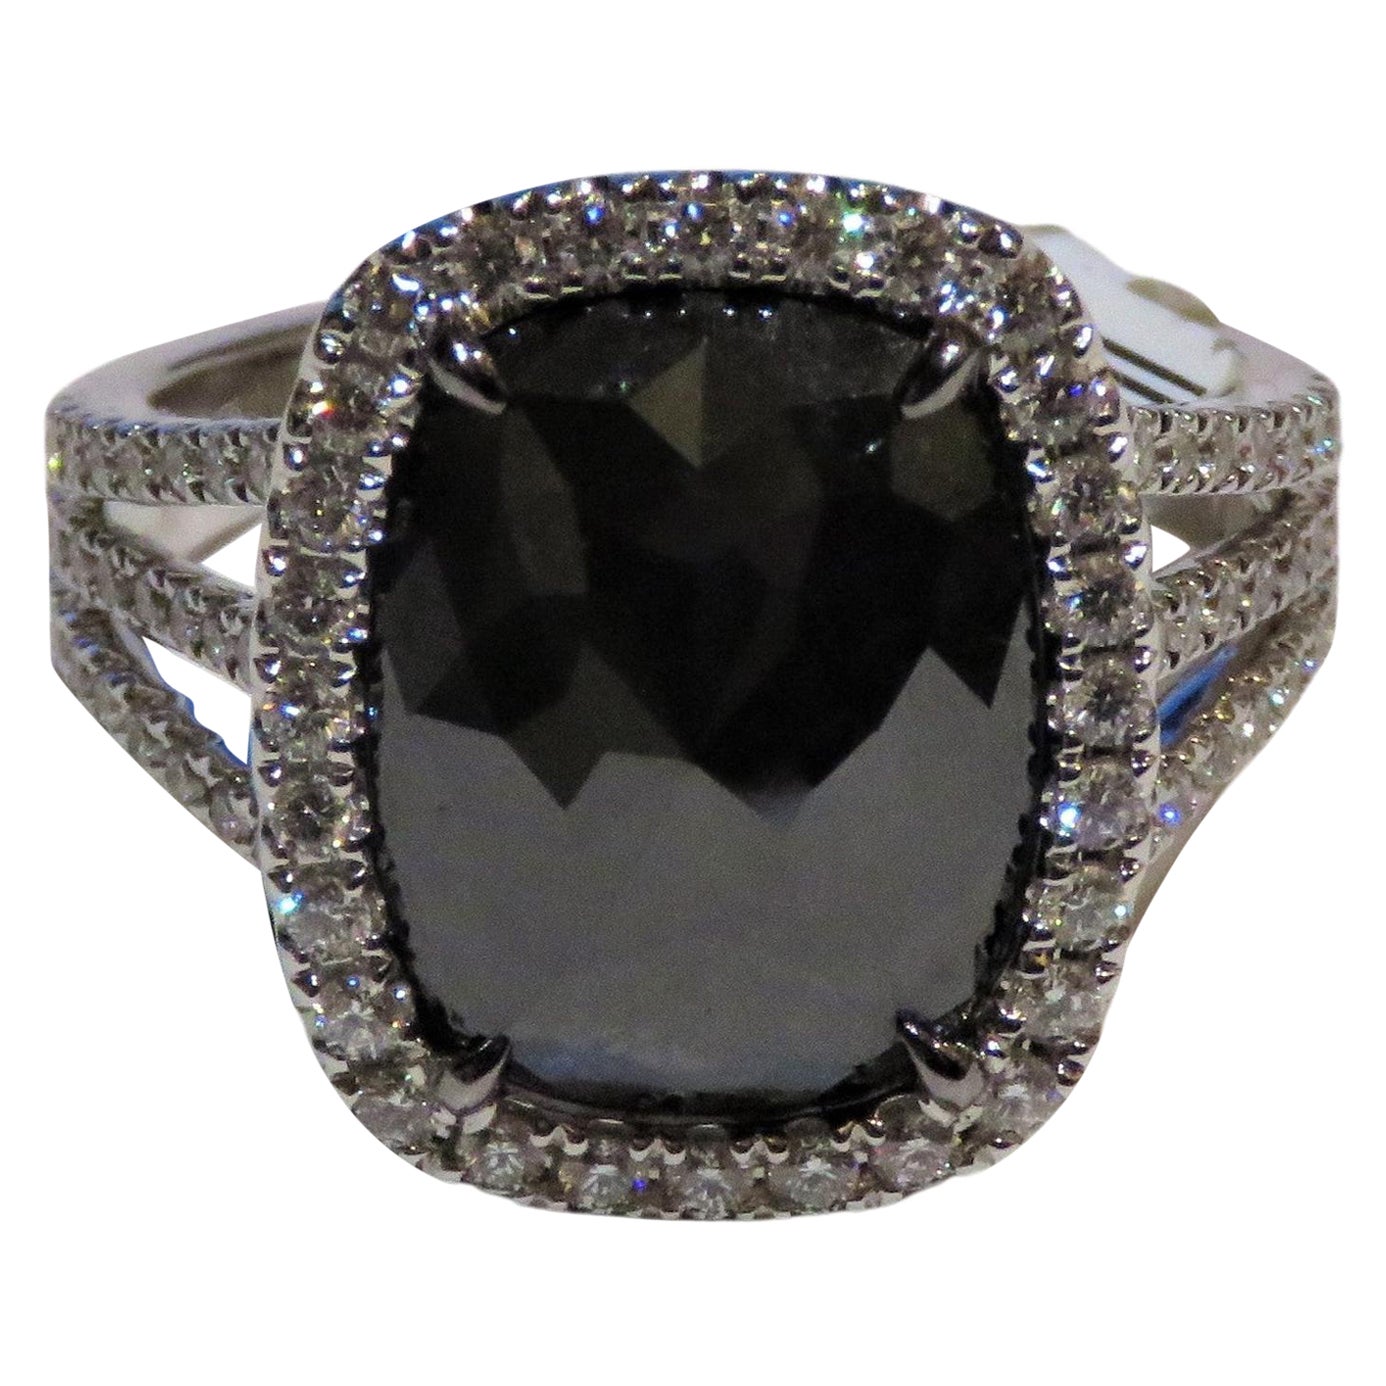 NWT $18, 000 18KT White Gold Rare Large 5CT Faceted Gorgeous Black Diamond Ring